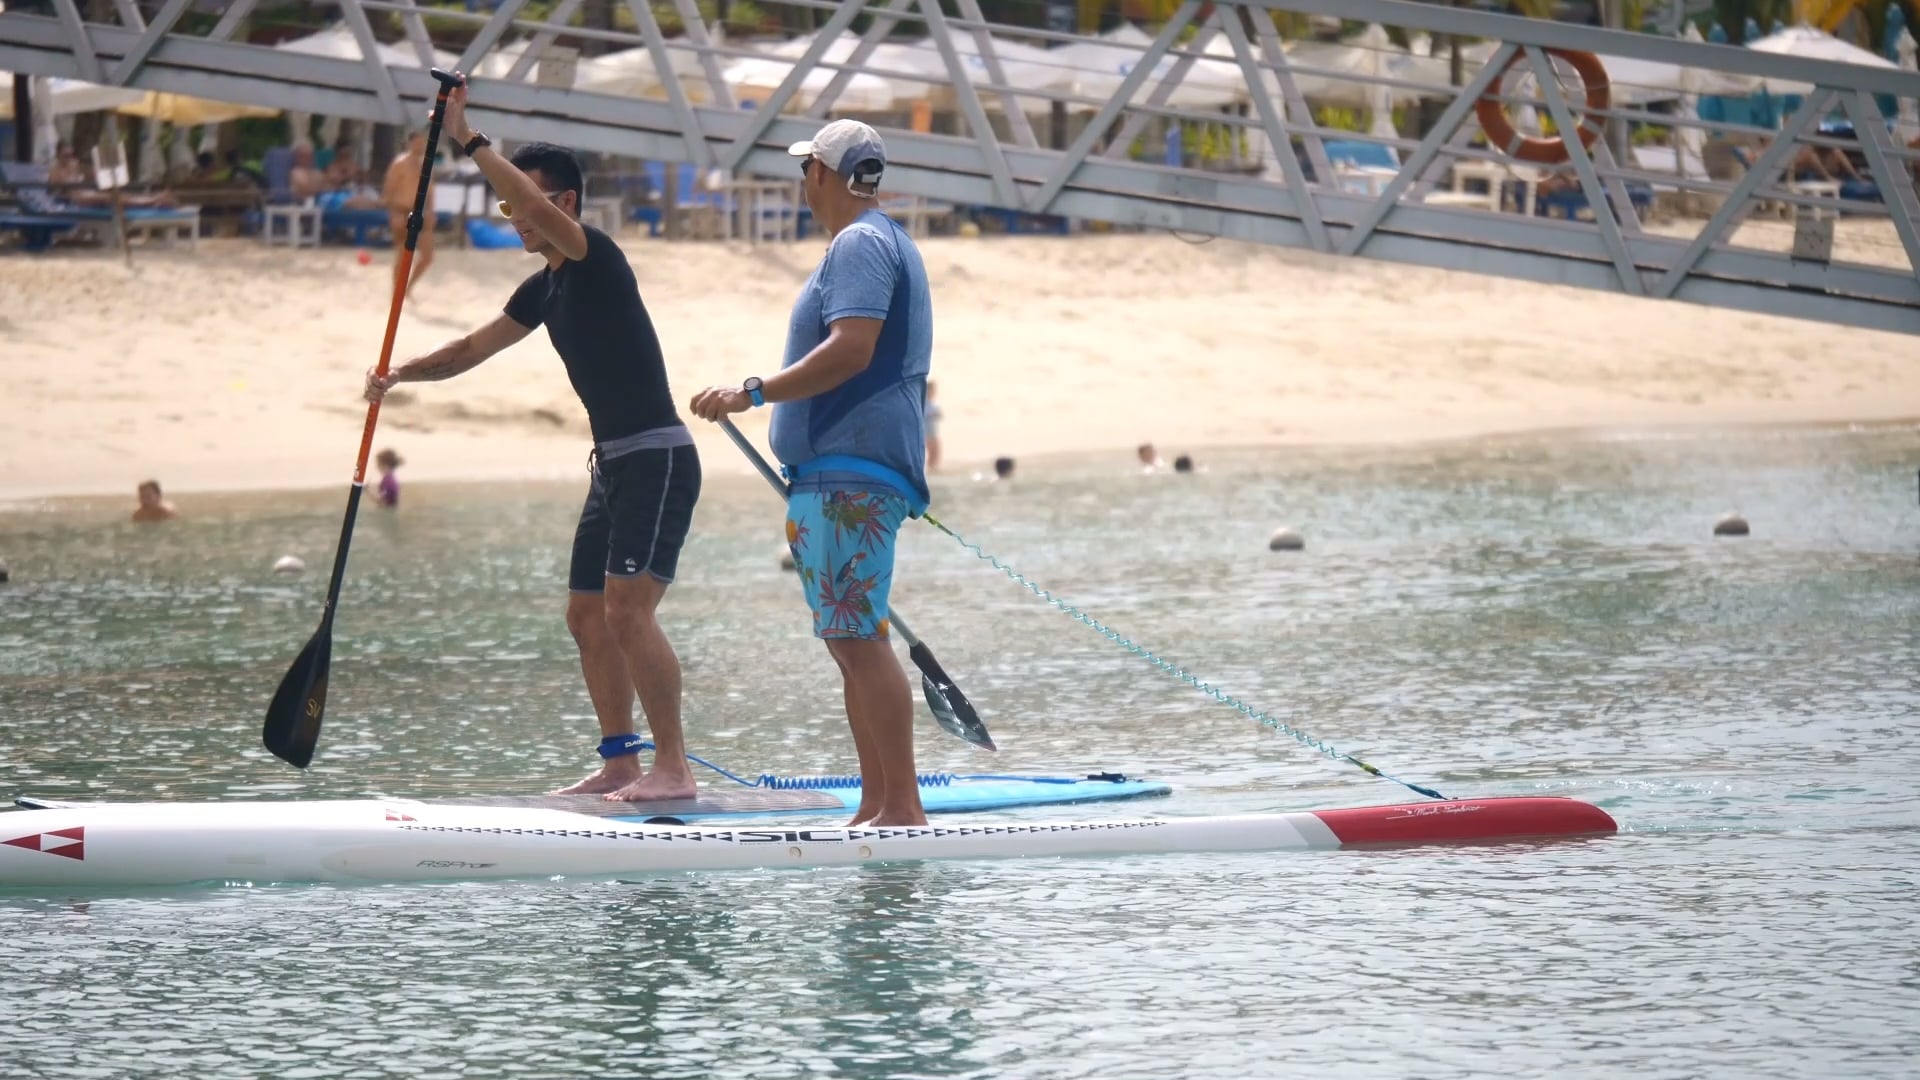 Yurii Siegel: Stand Up Paddle Instructor of SUPventures